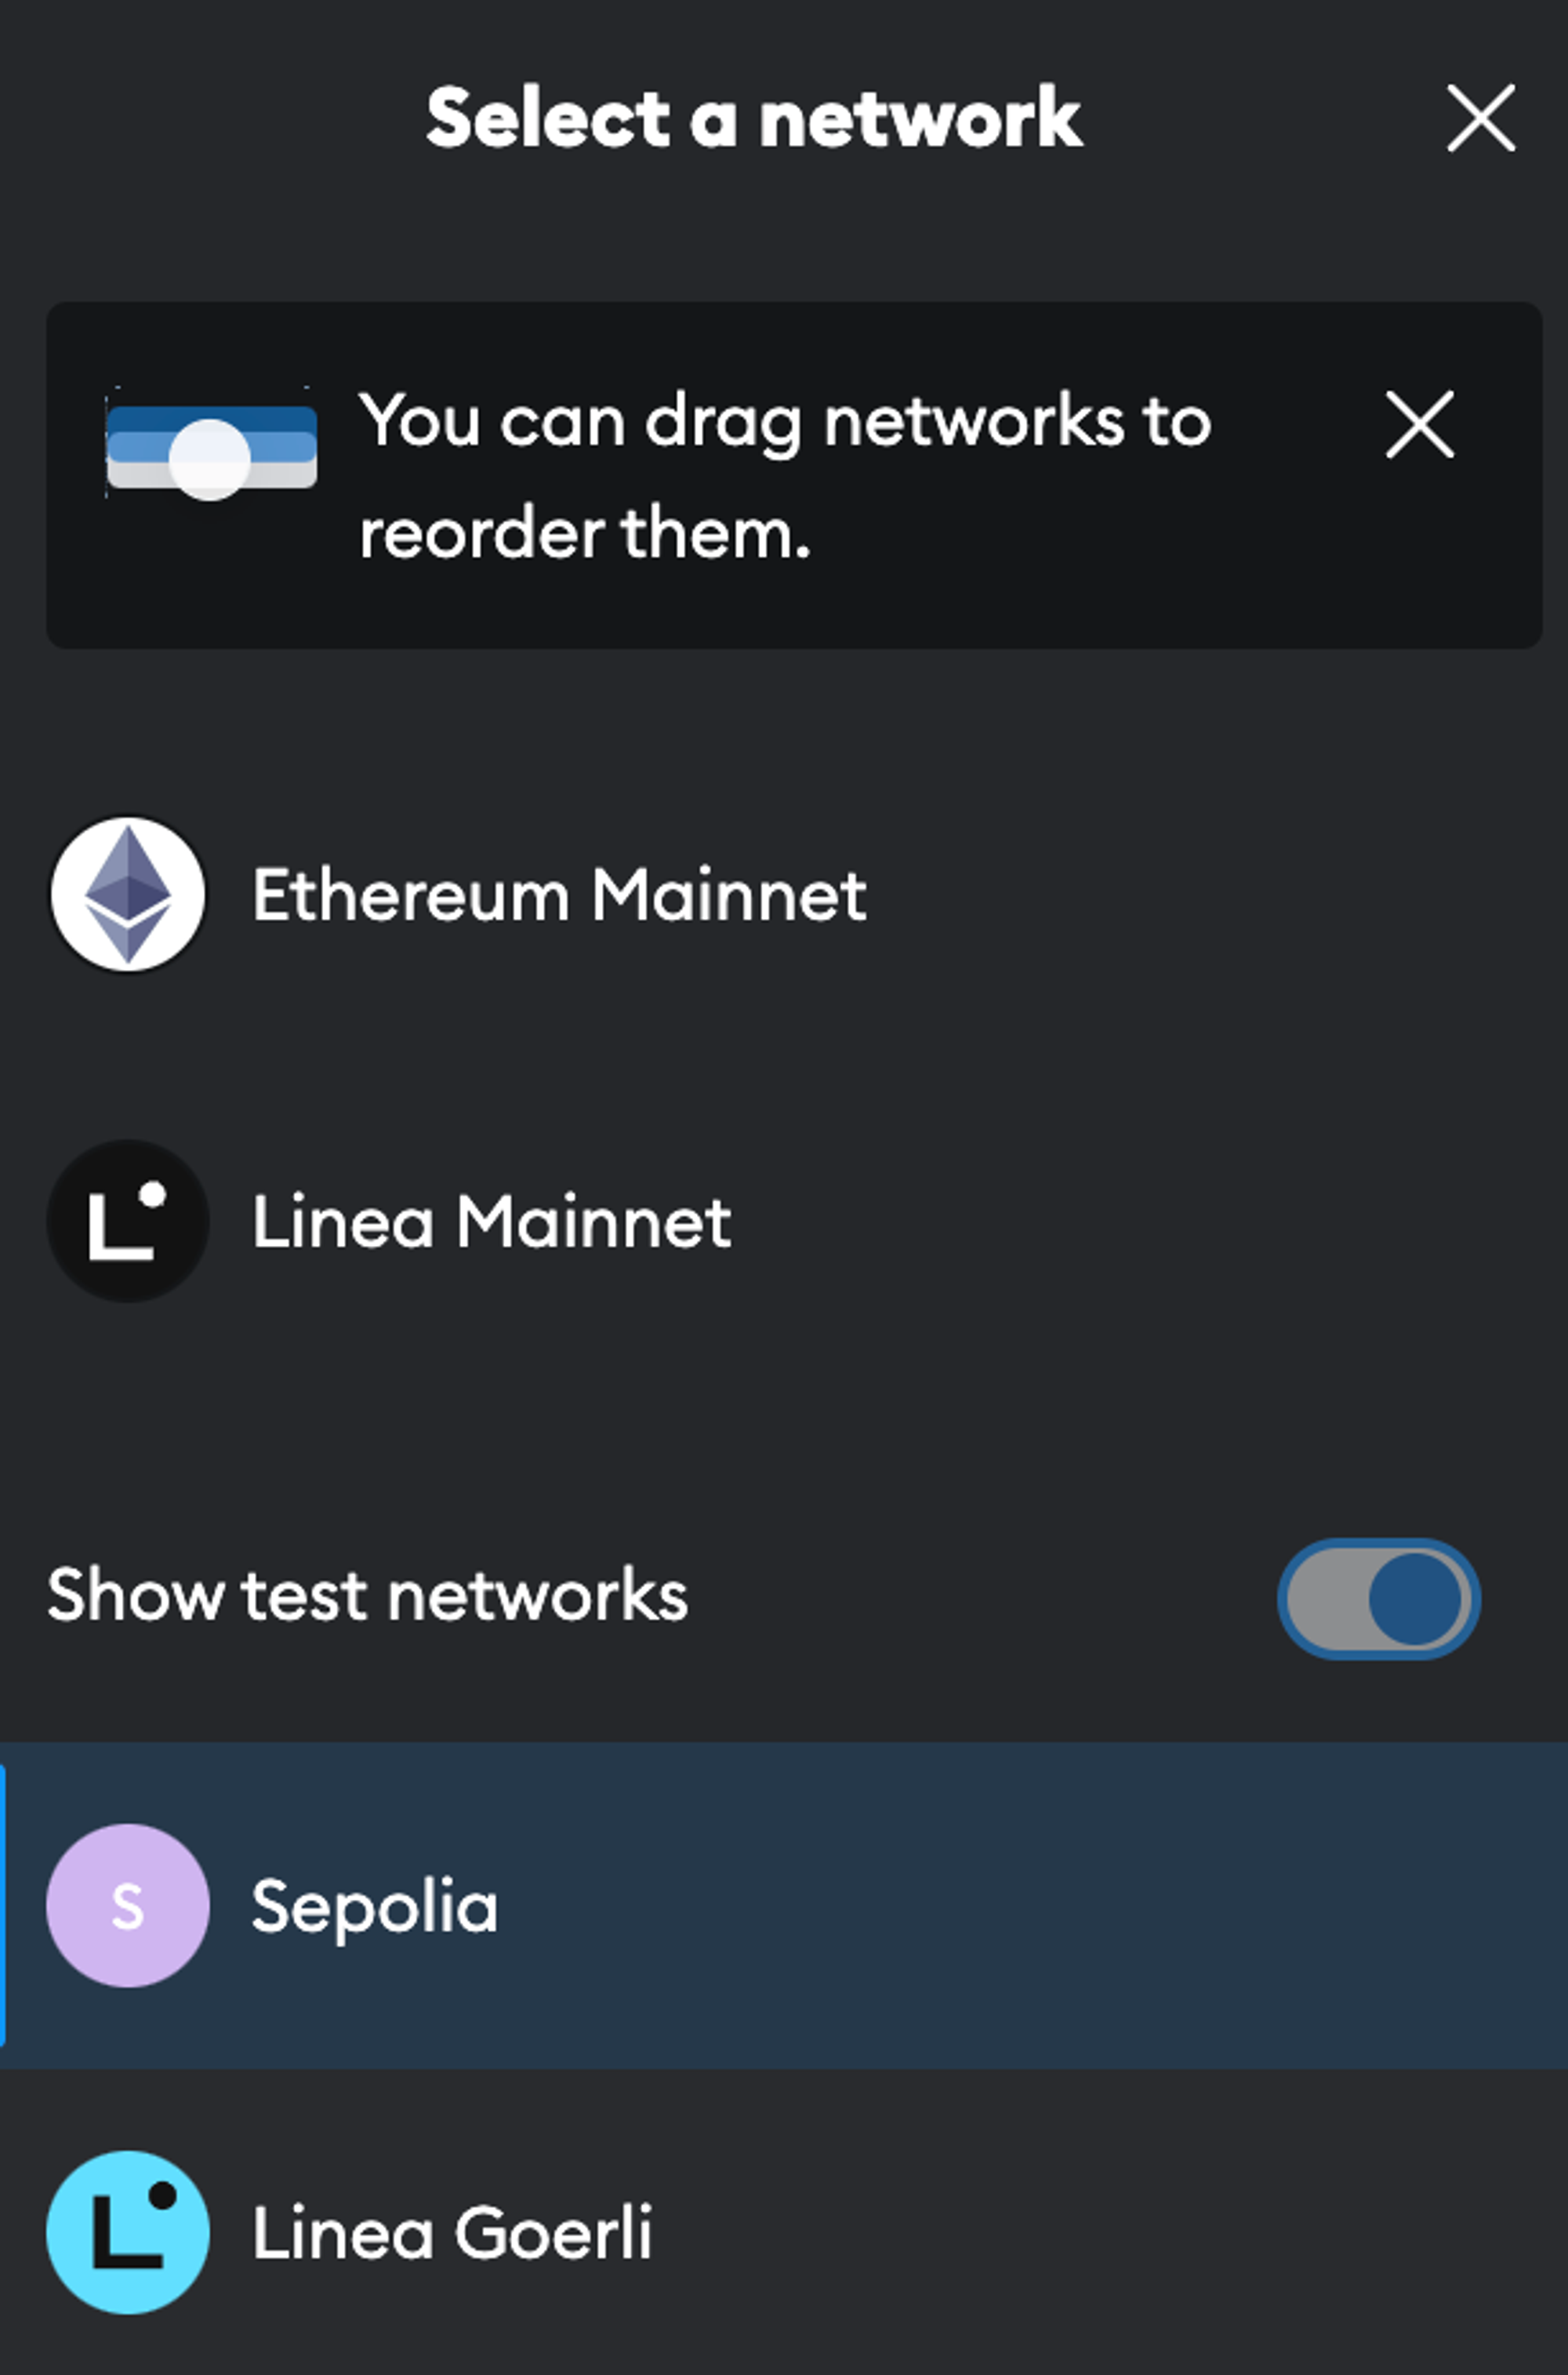 Your Guide to run Devnet Node on Powerloom Protocol